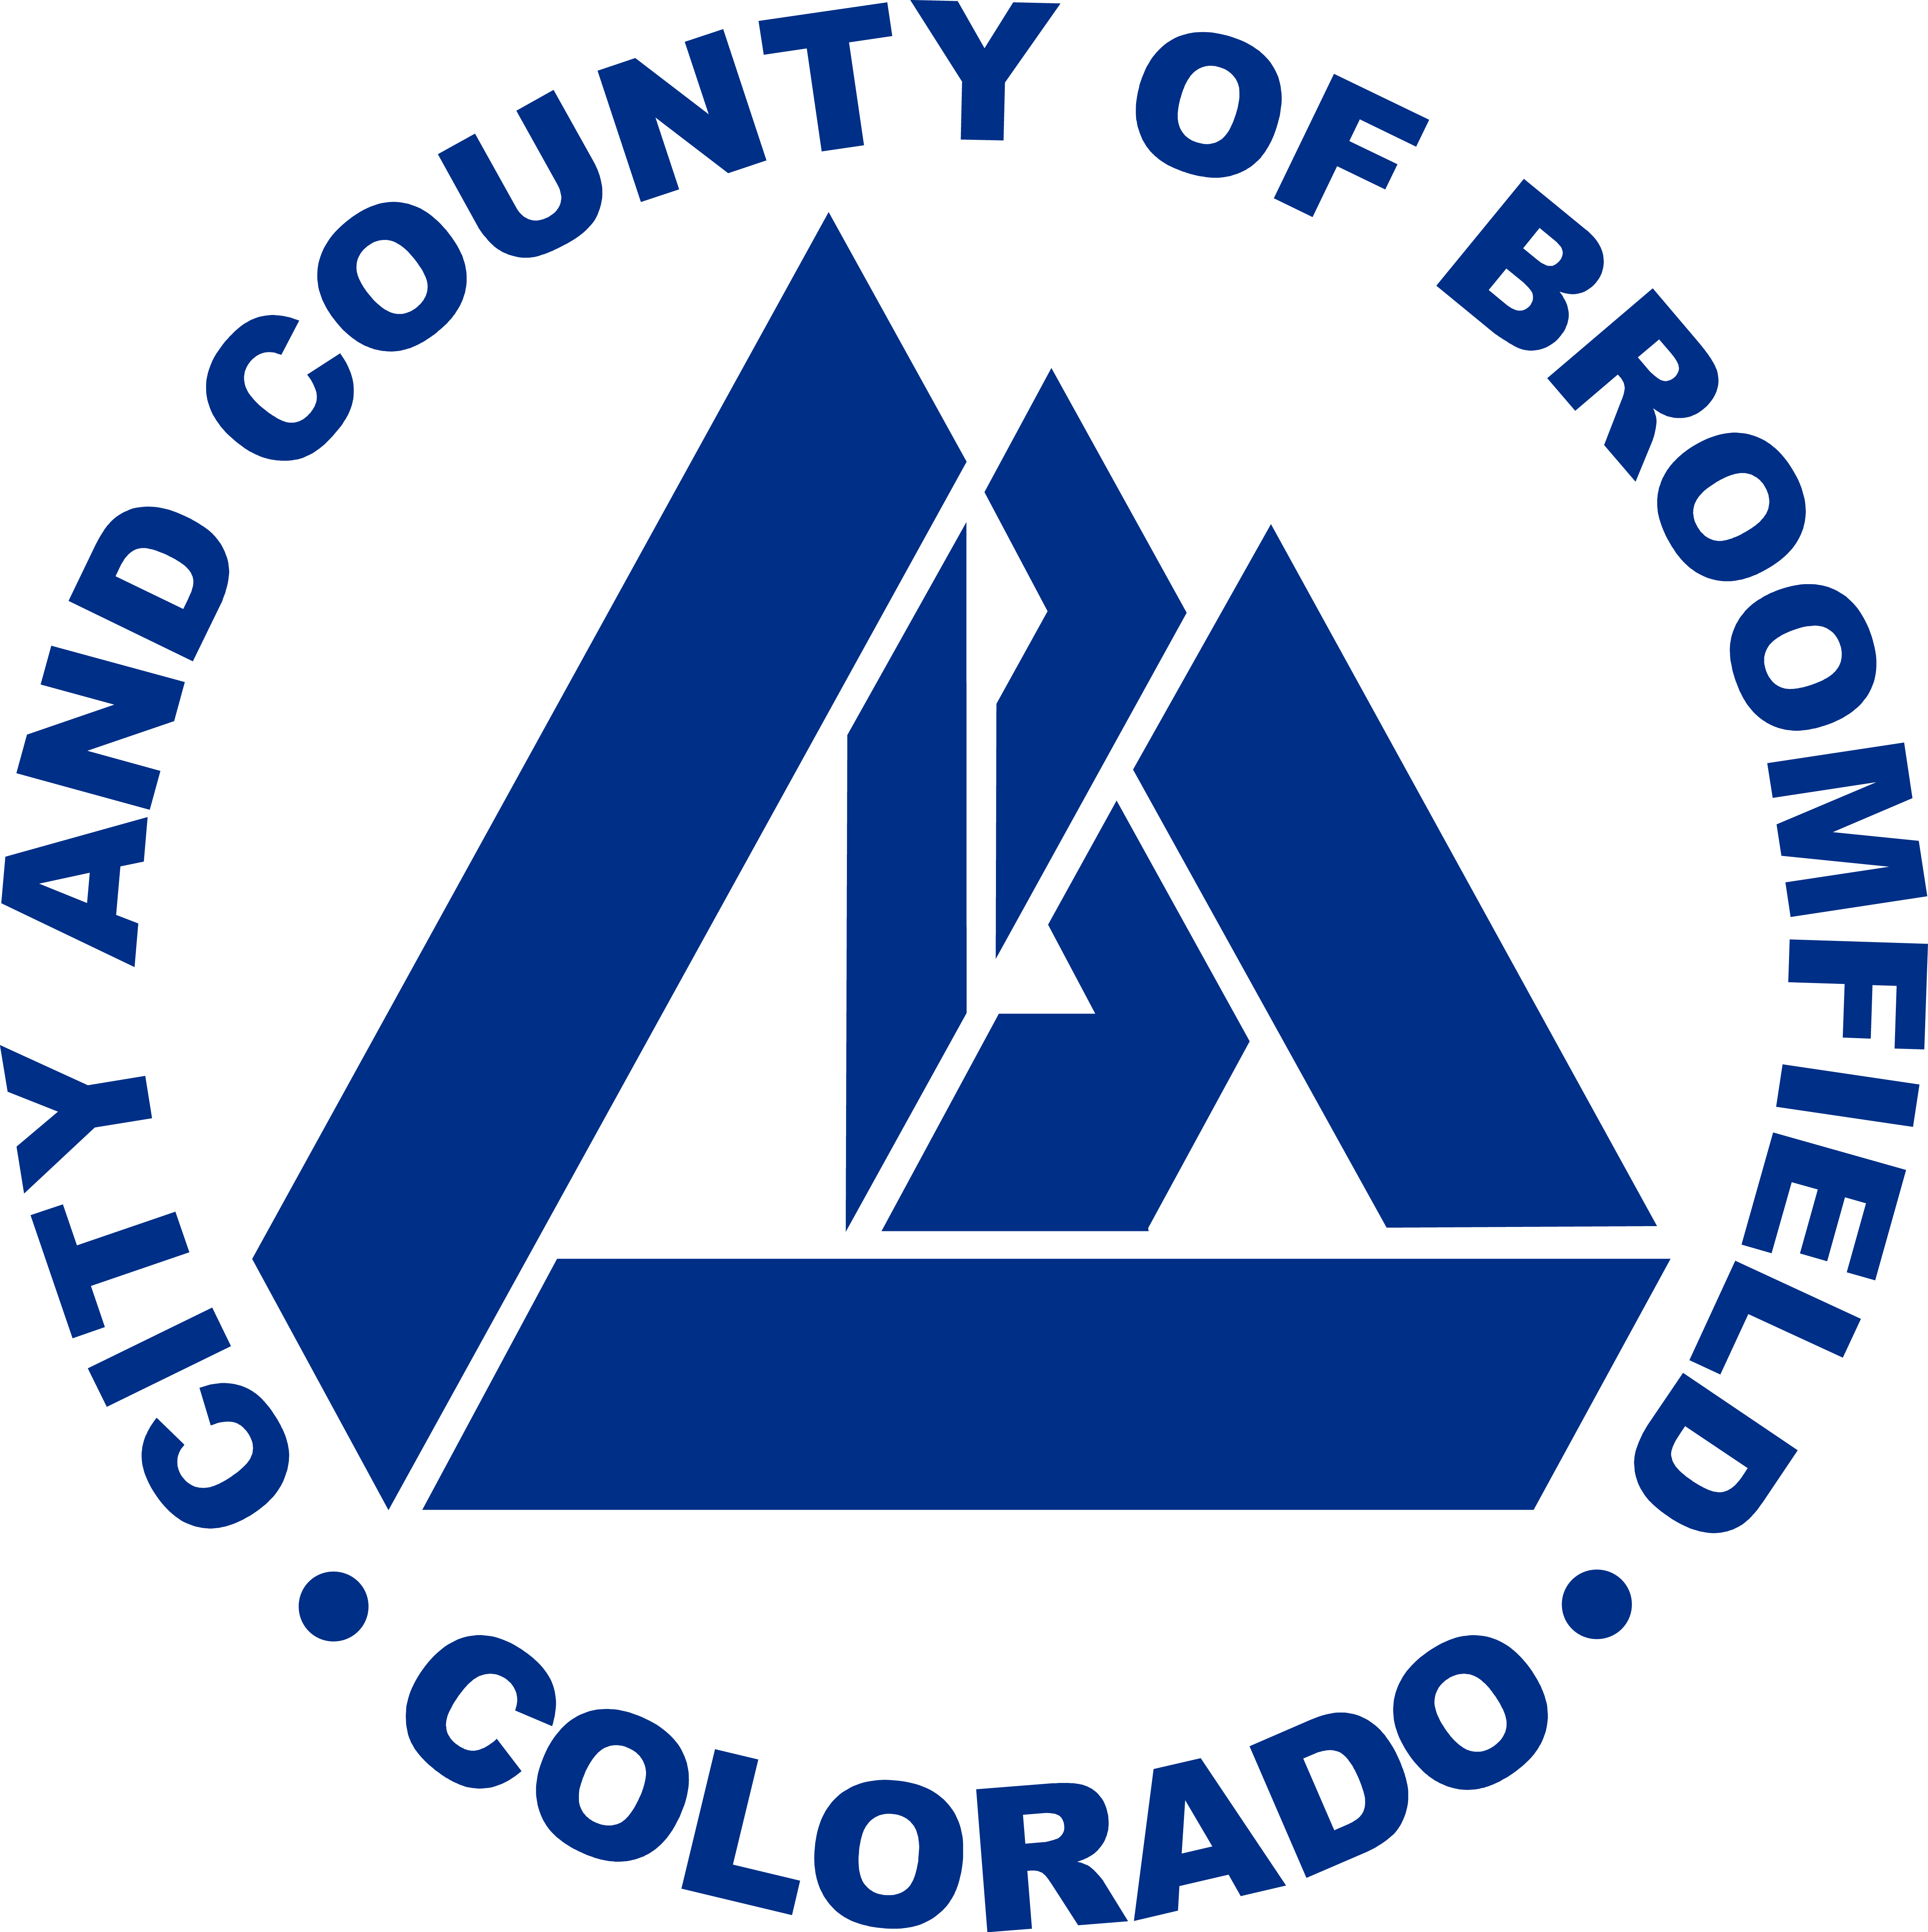 City and County of Broomfield logo